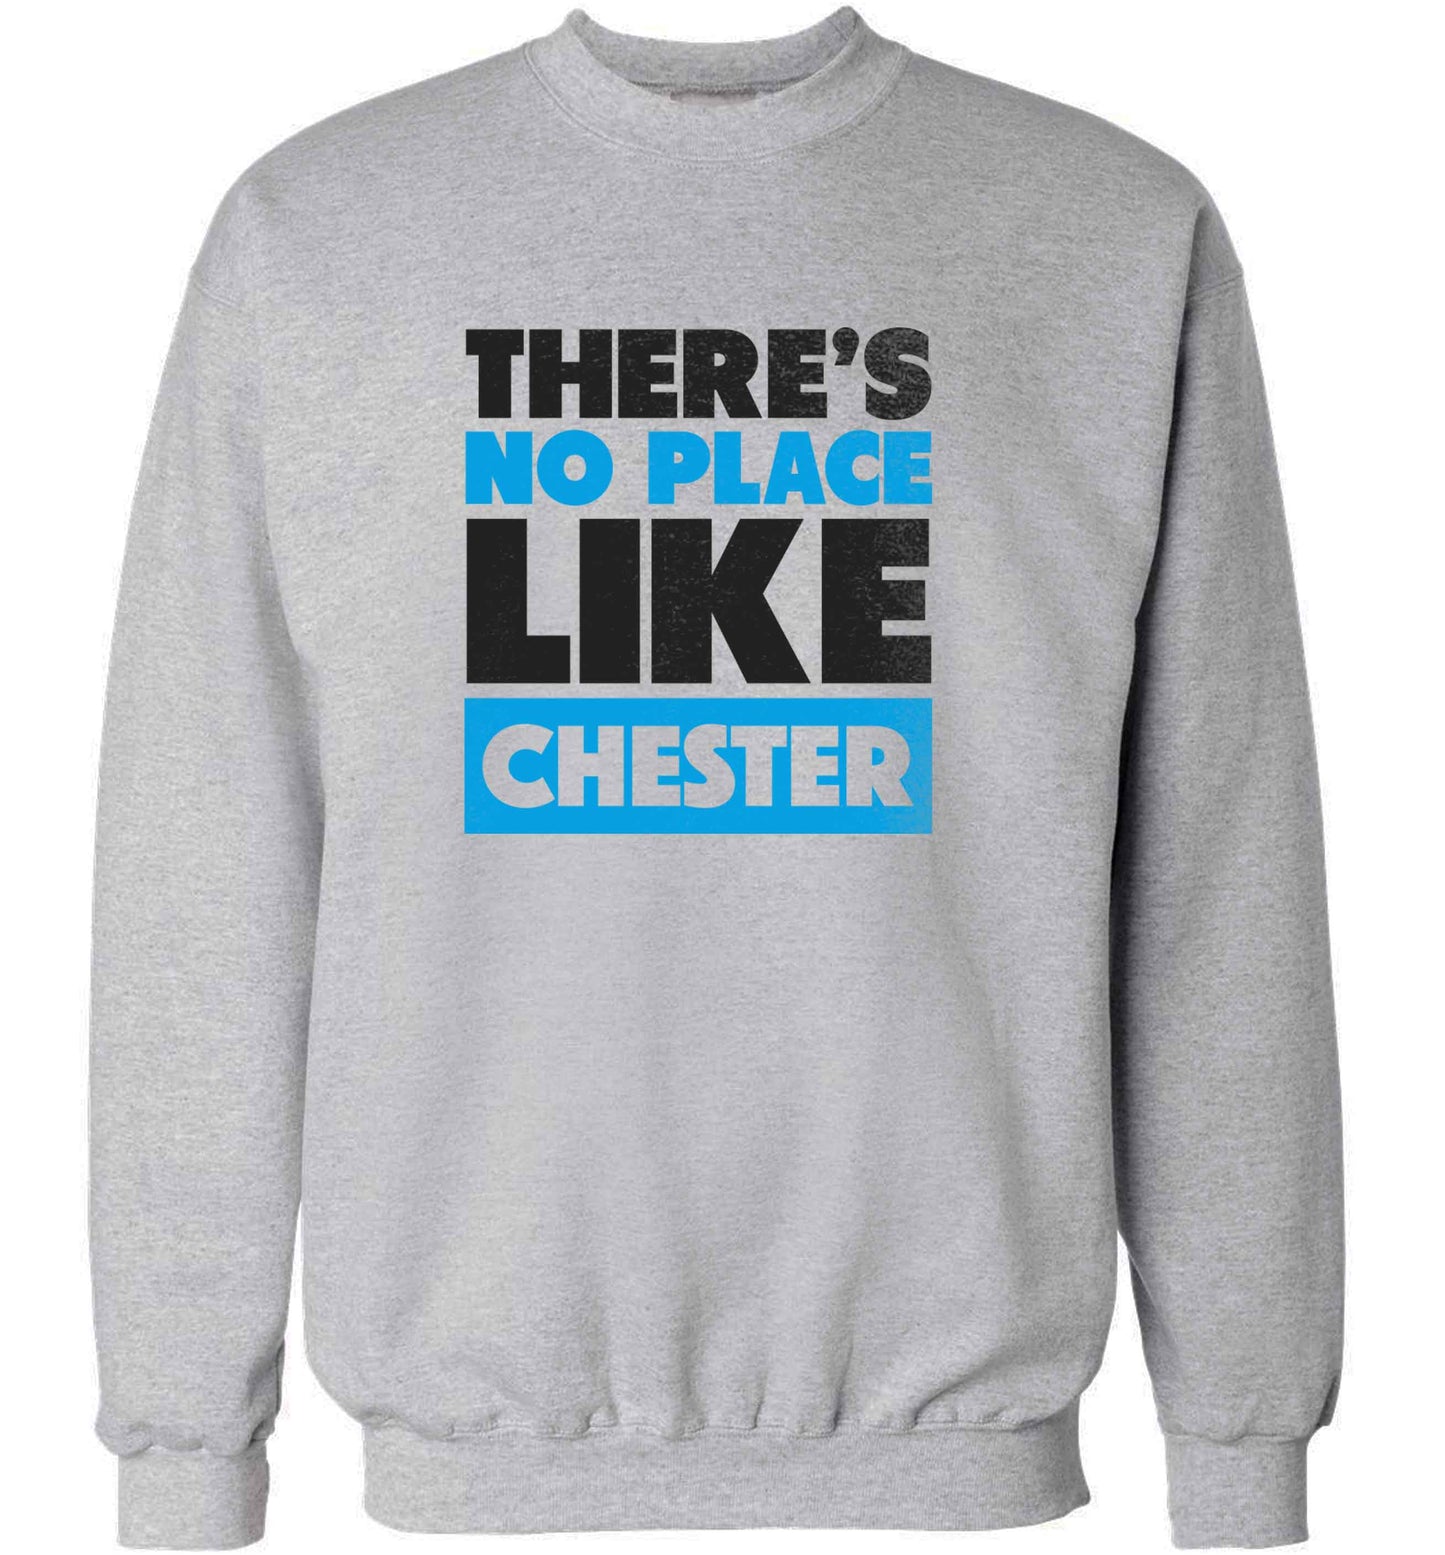 There's no place like Chester adult's unisex grey sweater 2XL